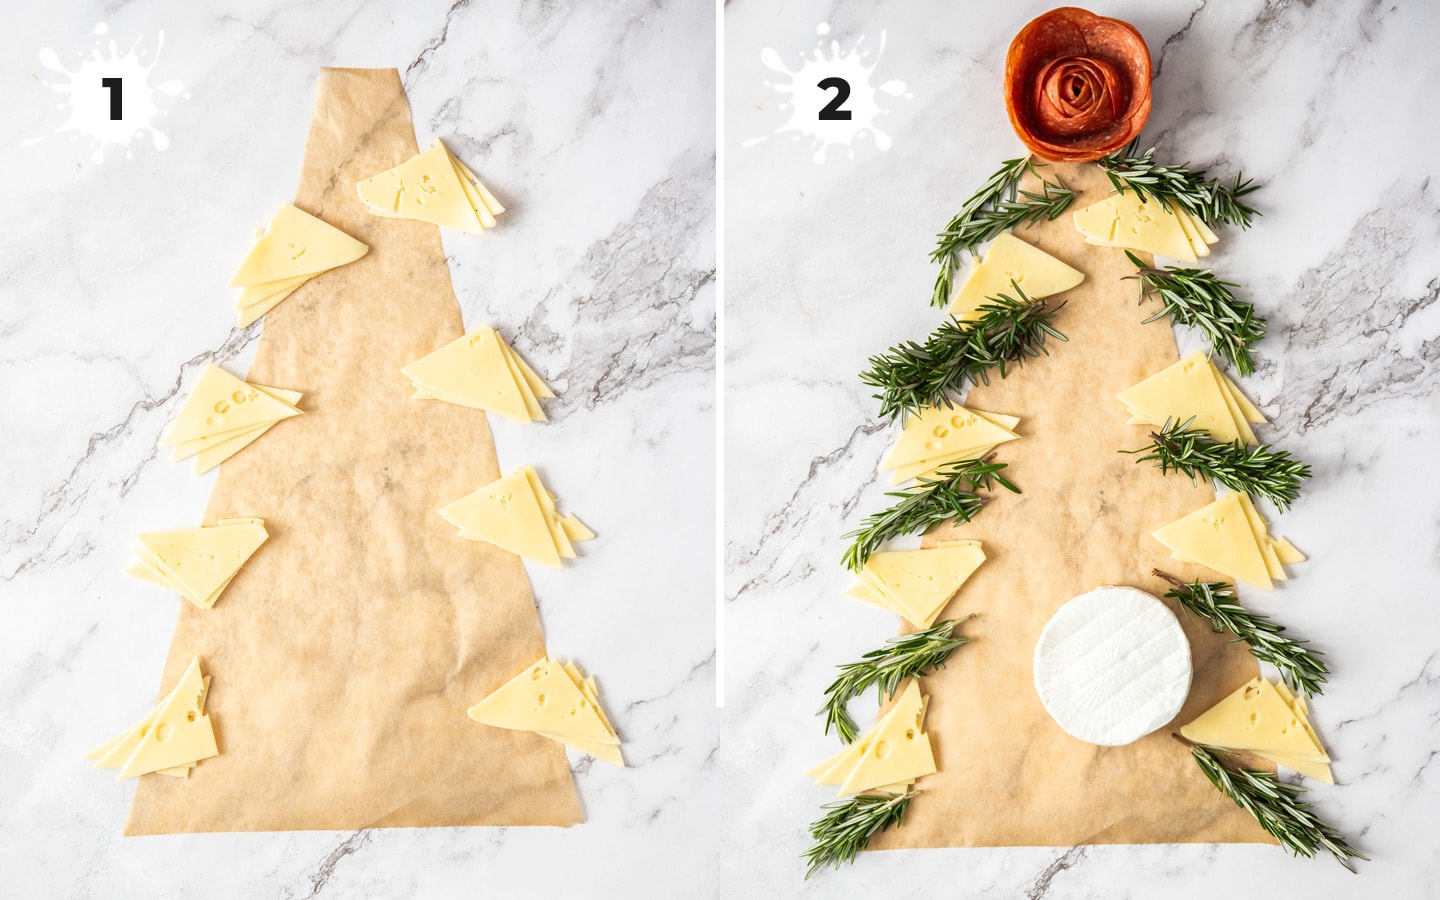 Starting with a parchment paper tree shape and adding cheese slices and rosemary.